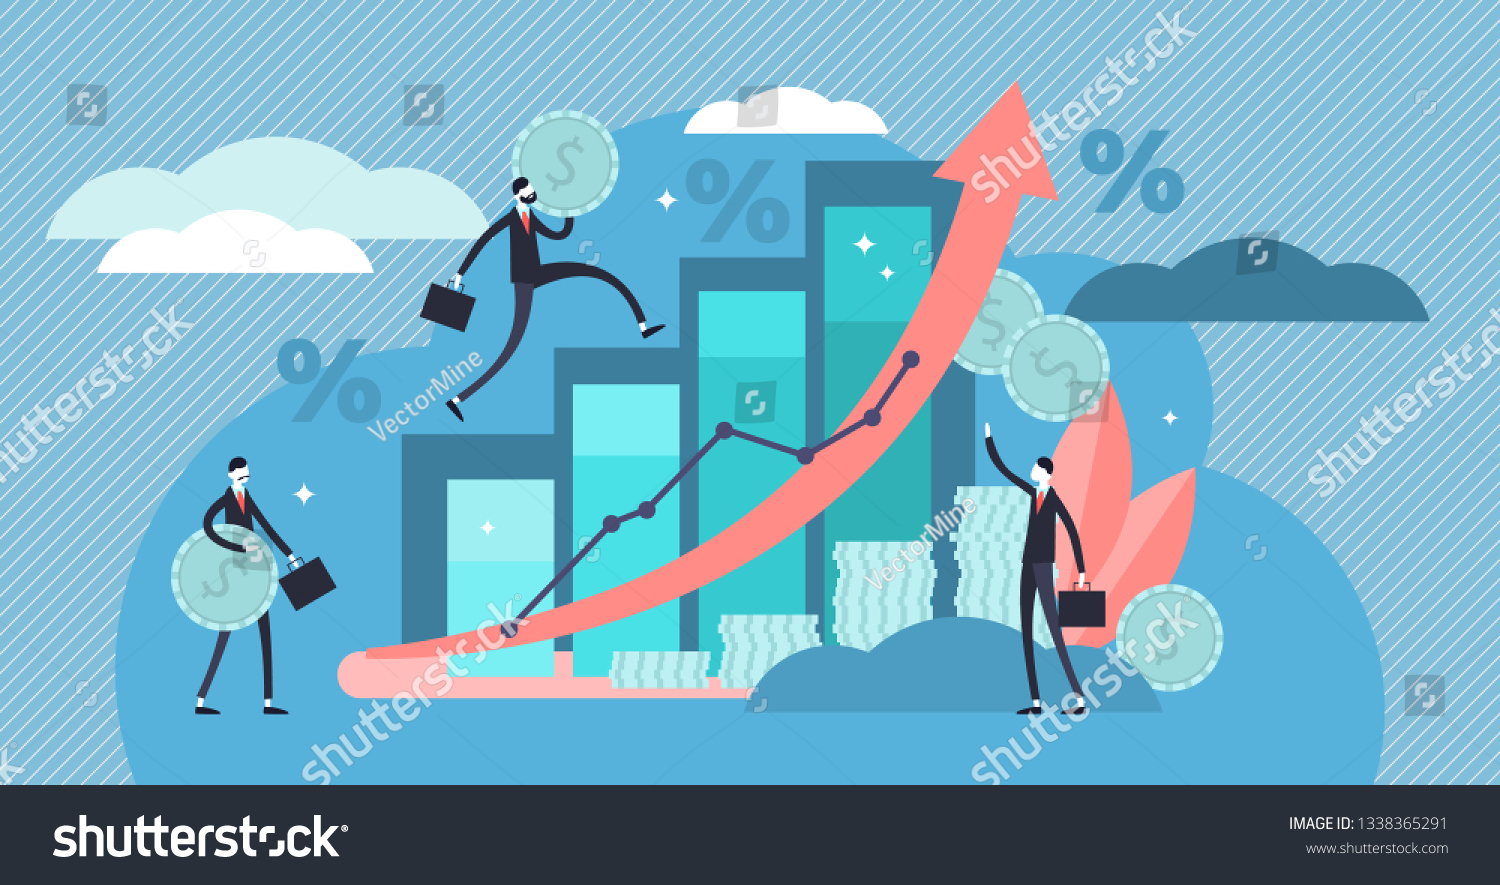 SVG of Financial forecast vector illustration. Flat tiny economical persons concept. Money growth prediction and progress report. Symbolic company sales improvement statistics calculation and measurement. svg